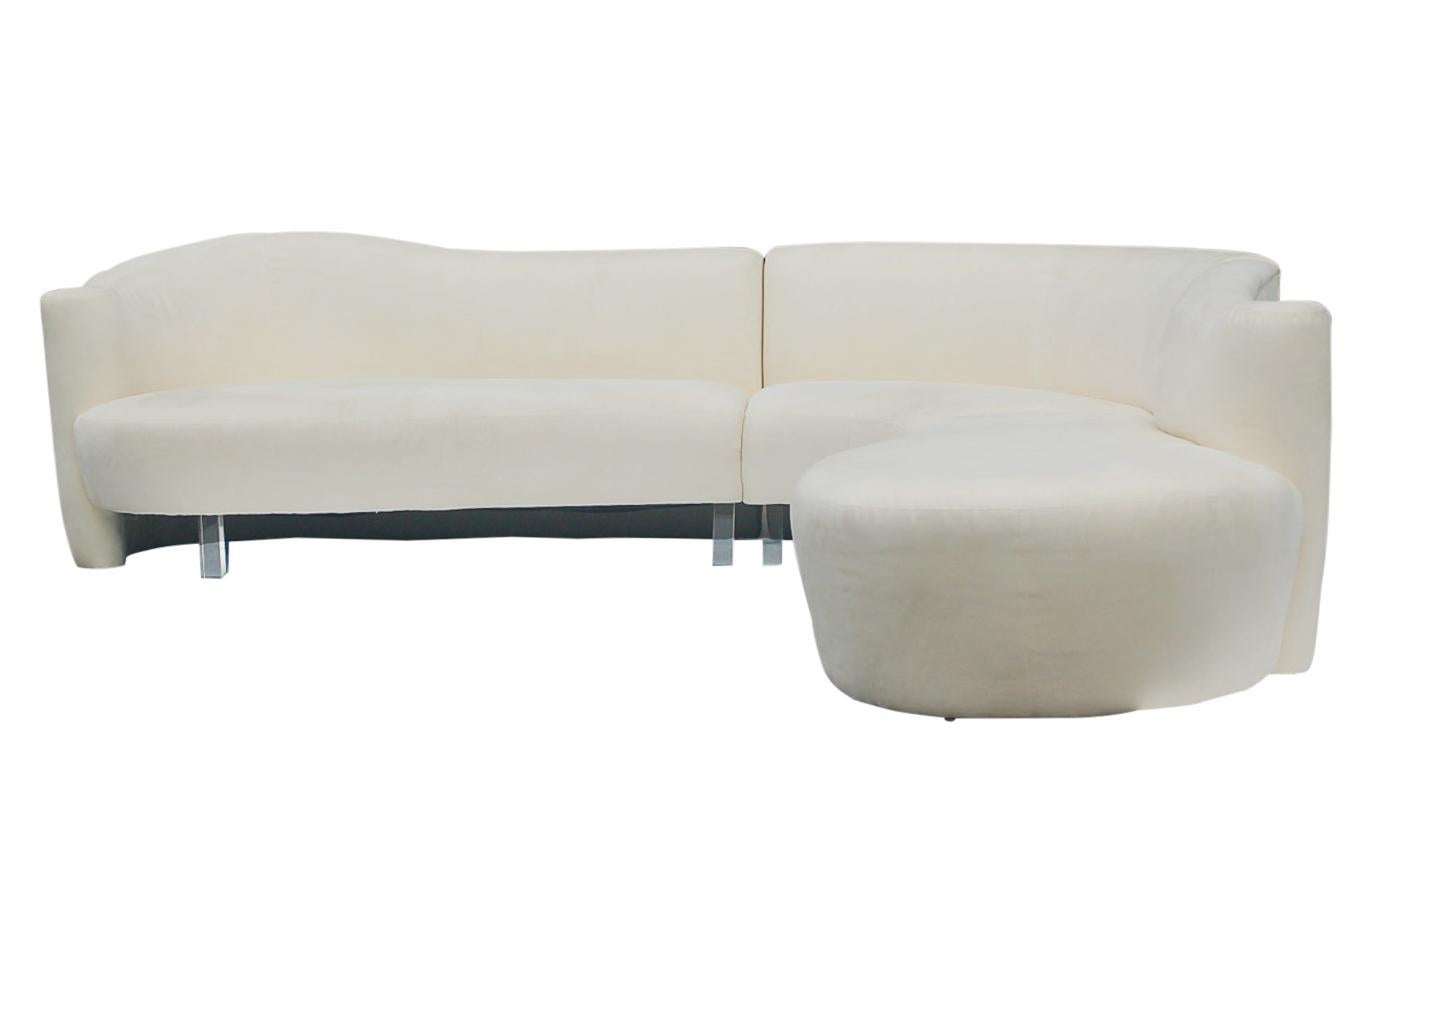 An impressive sculptural design by Weiman Furniture in the 1980s. This sofa features 3 piece locking sections, Lucite legs, and white upholstery. Manufacturers label. The upholstery is original and is slightly soiled. Cleaning or reupholstery is